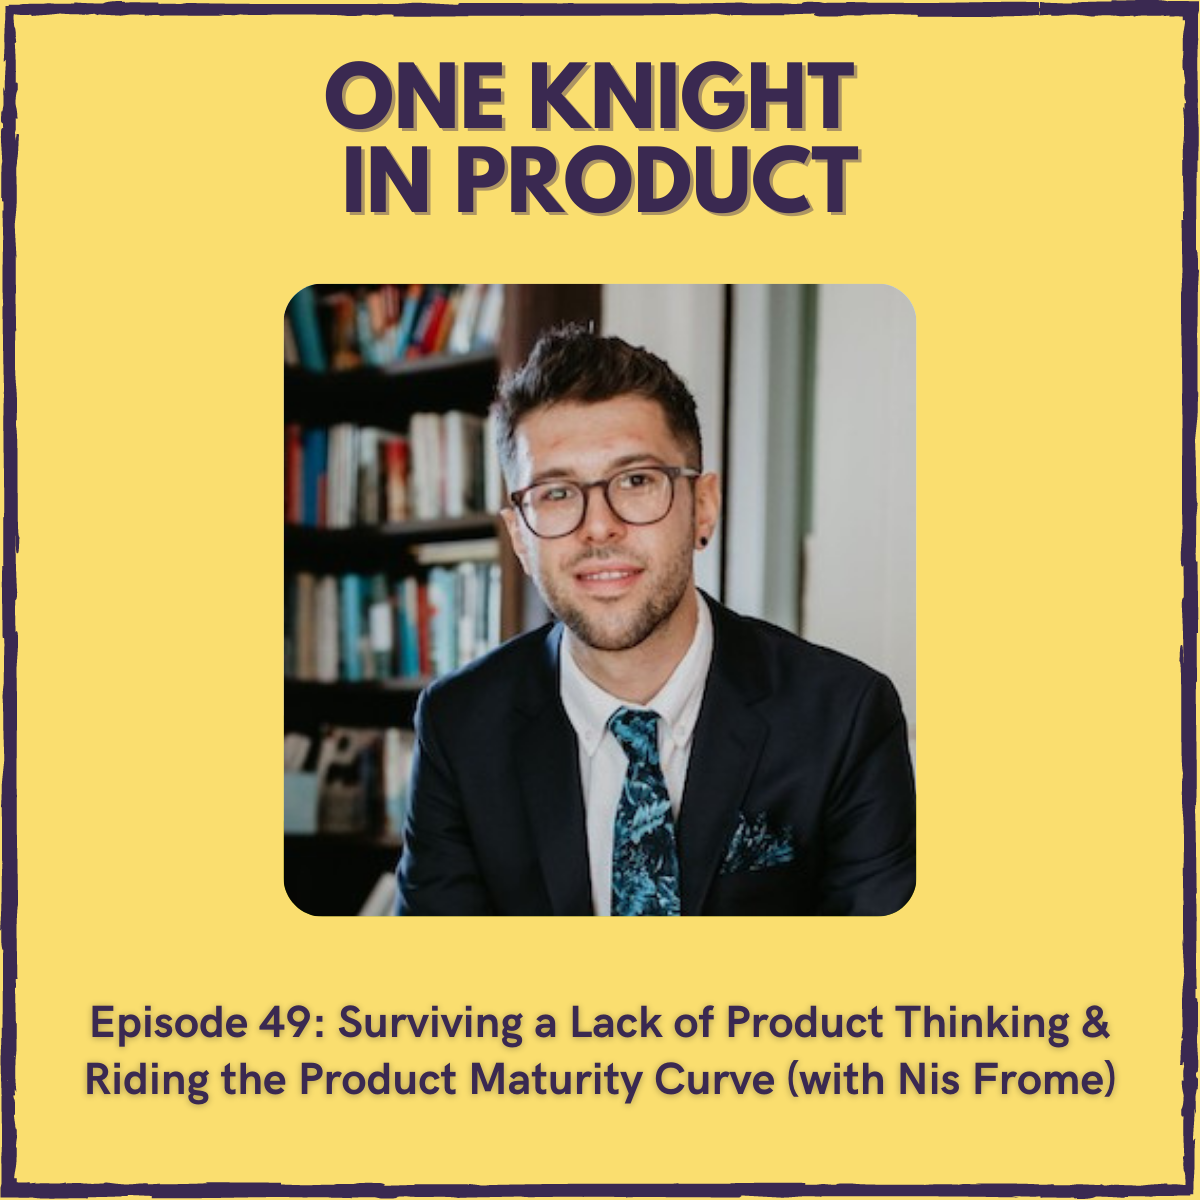 Surviving a Lack of Product Thinking & Riding the Product Maturity Curve (with Nis Frome, Co-founder & VP Product @ Feedback Loop)